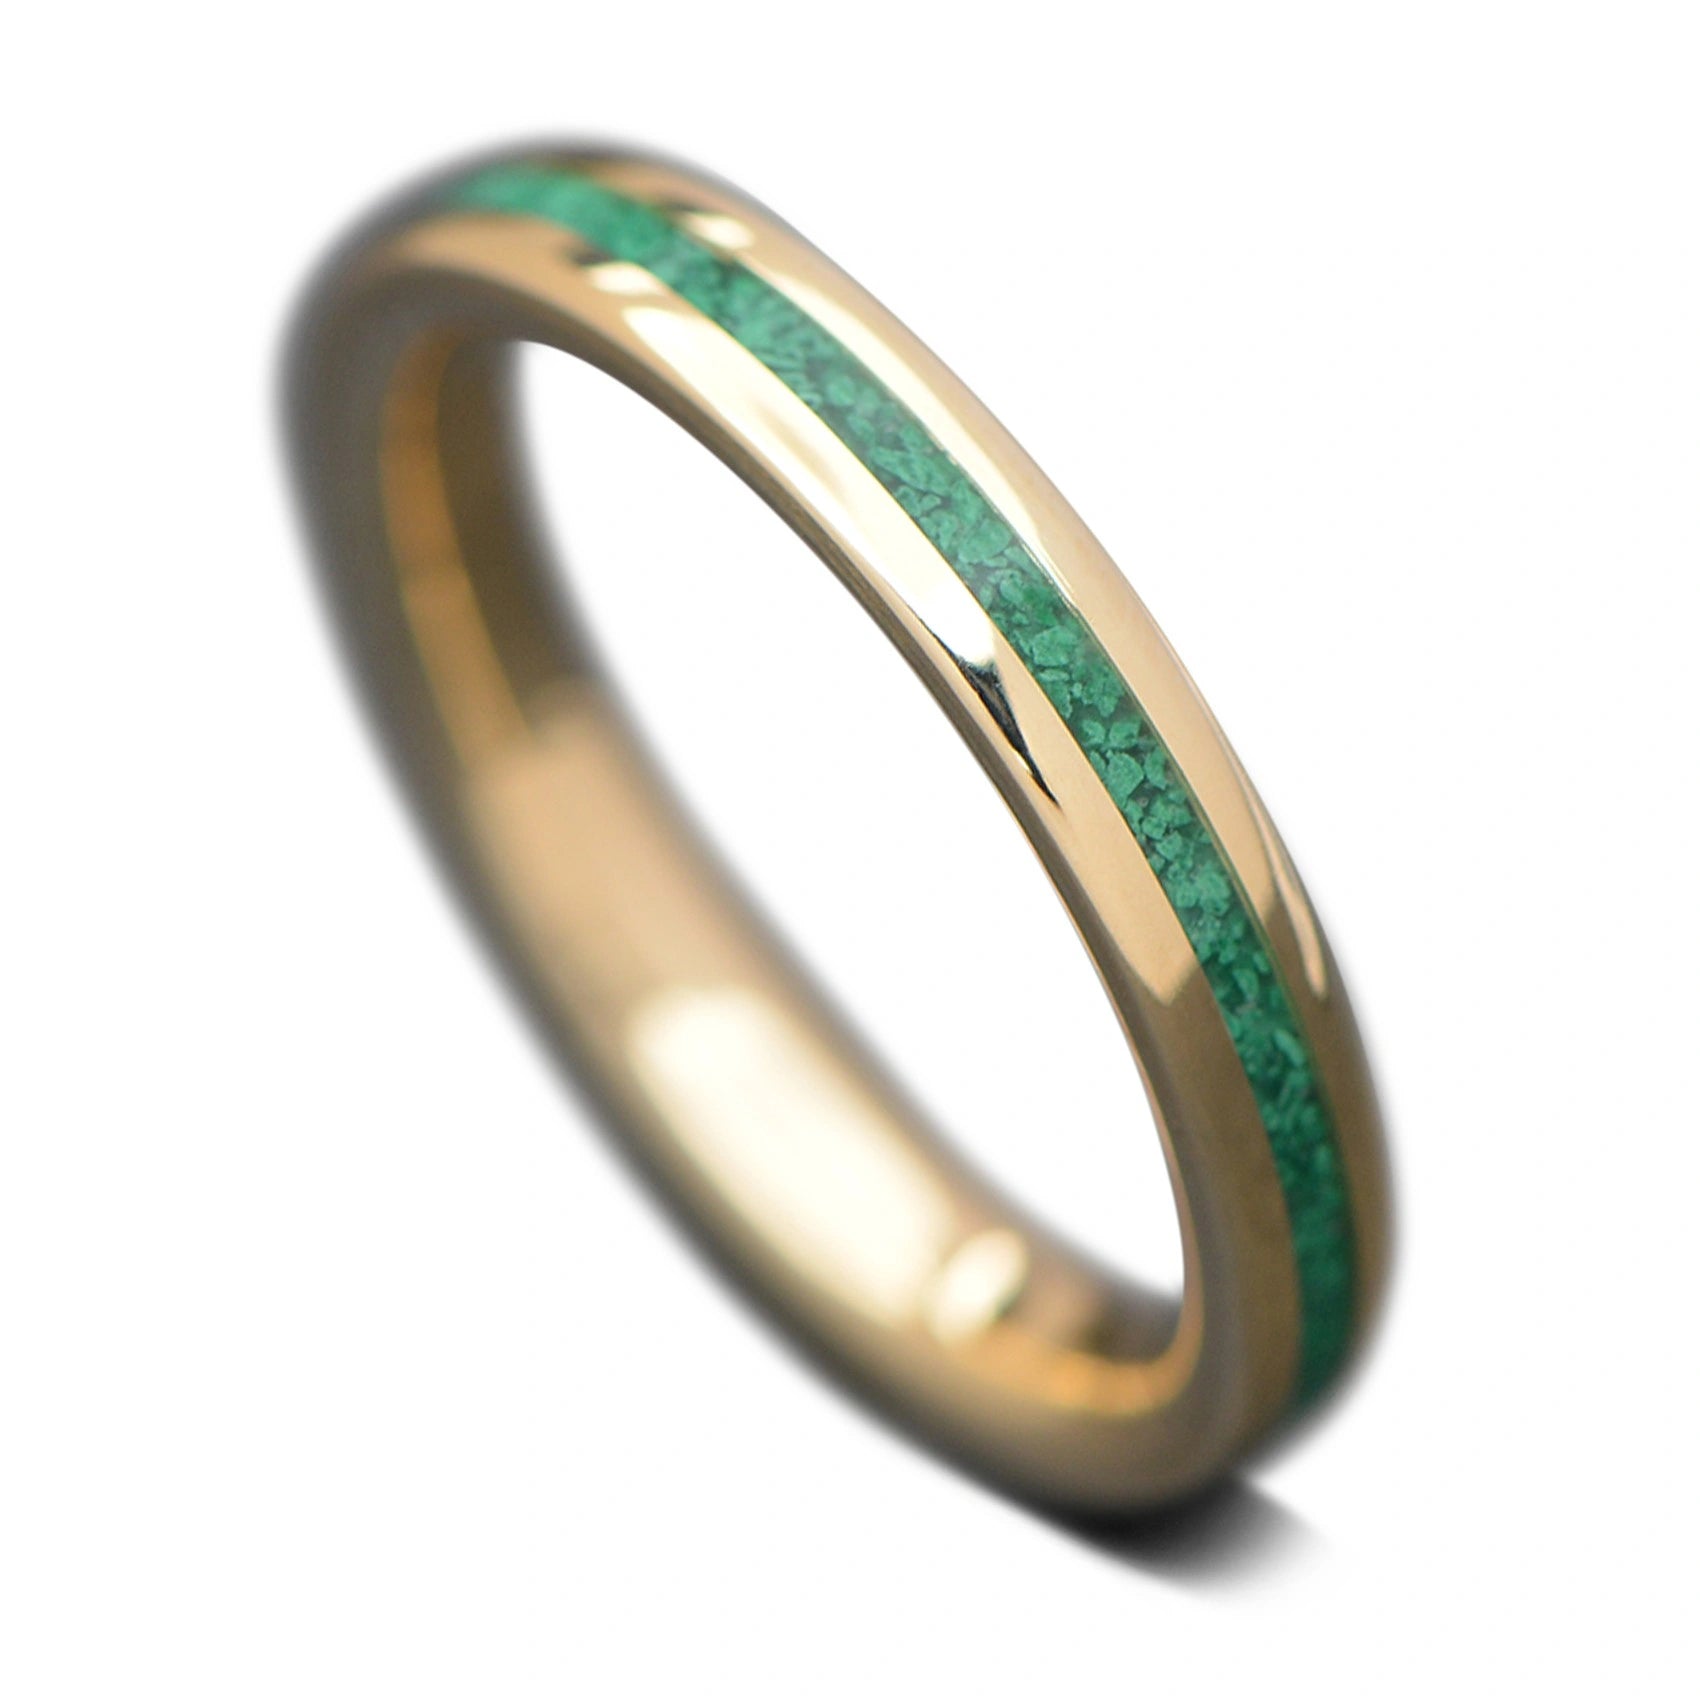  Yellow Gold core wedding ring with Malachite inner sleeve, 3mm -THE VOW